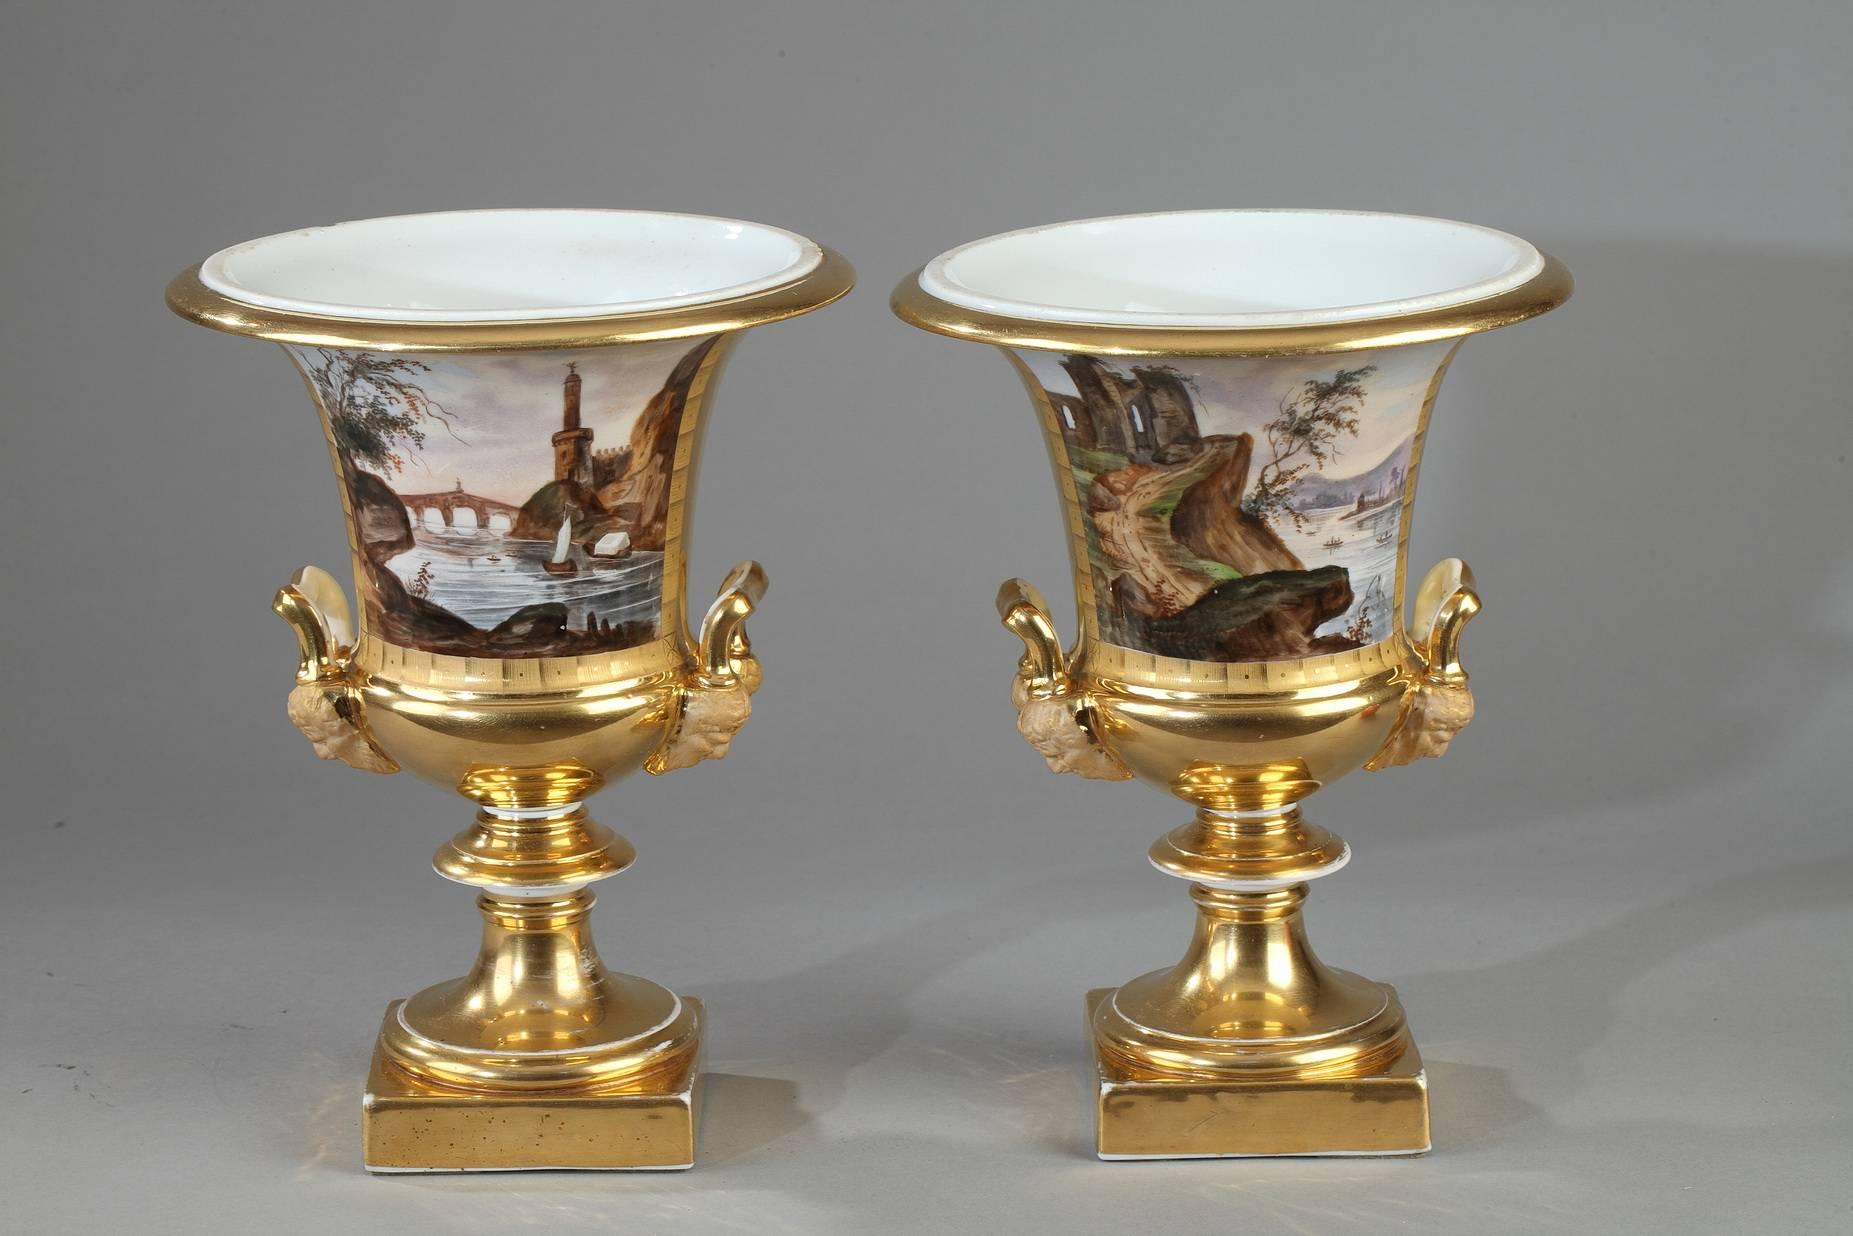 French 19th Century Pair of Porcelain Medici Vases with Views of Italy